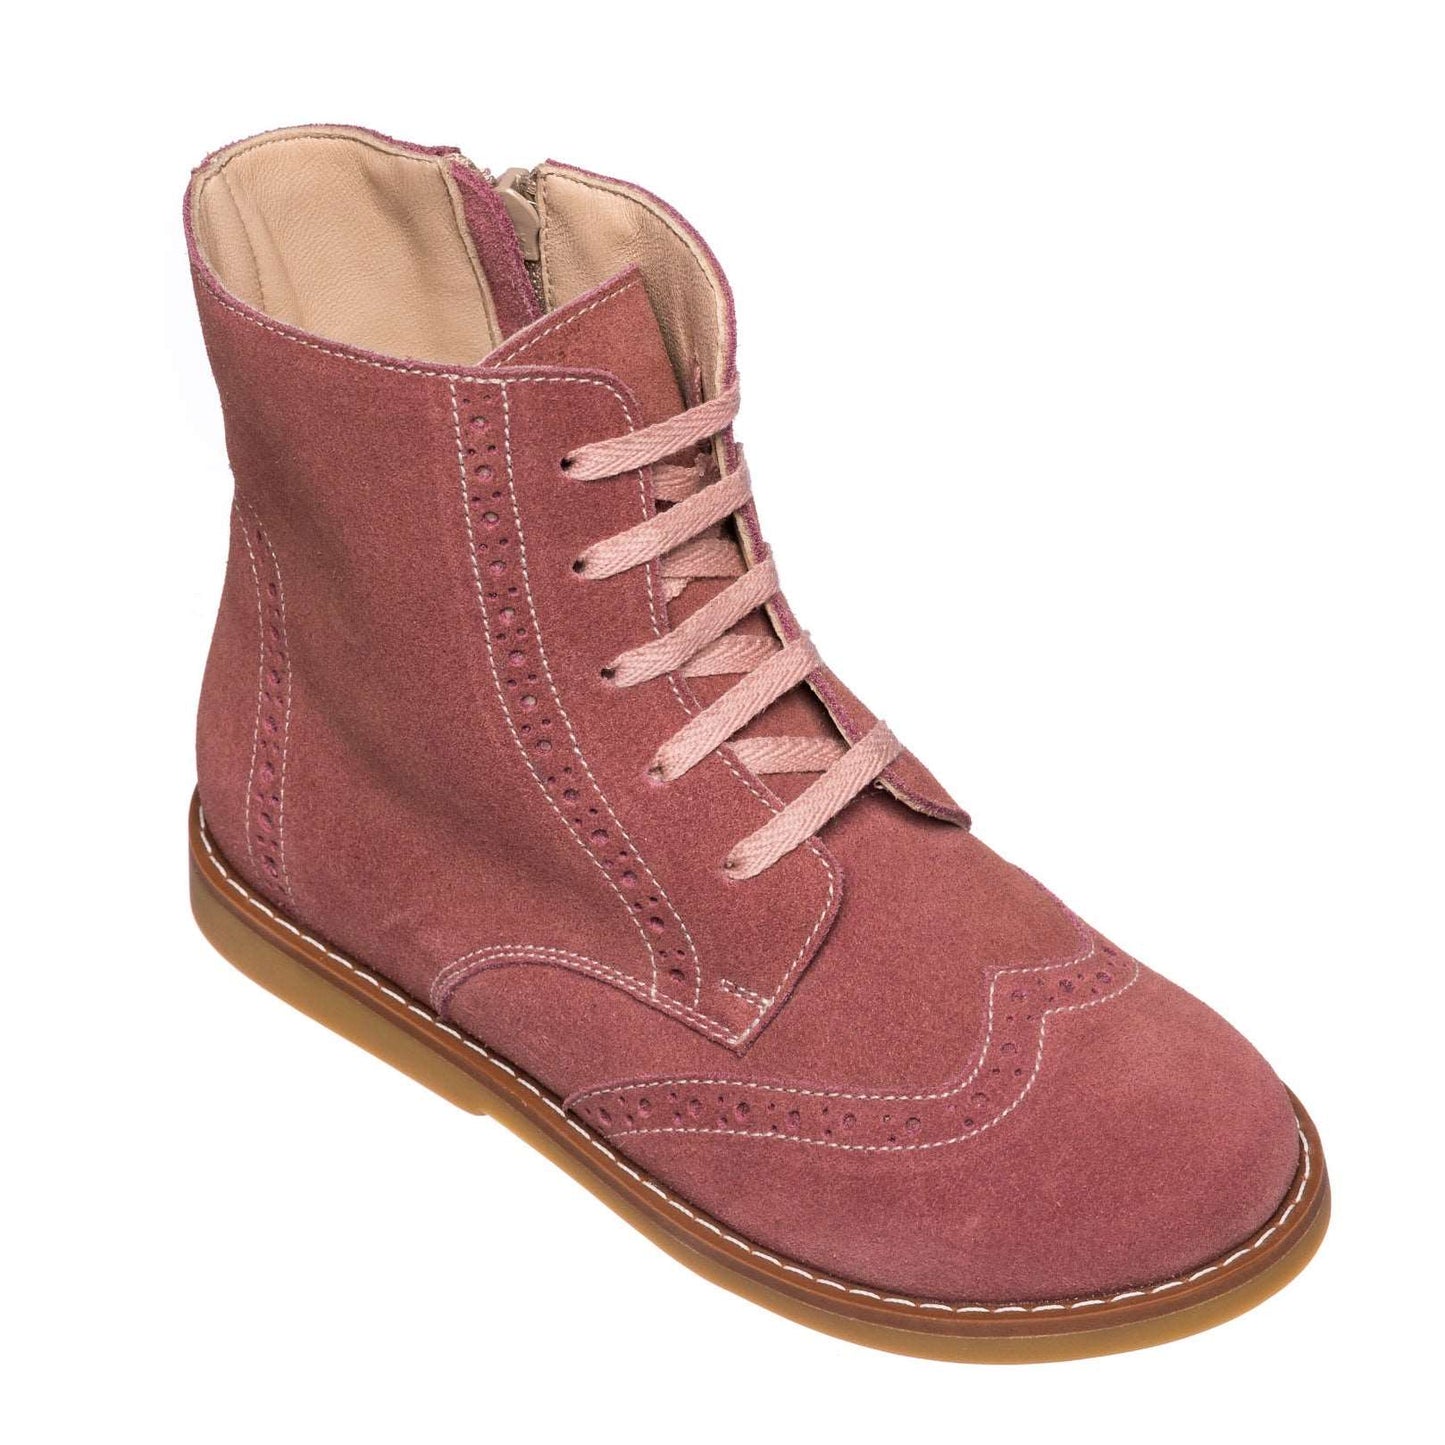 Bootie w Laces Suede Pink